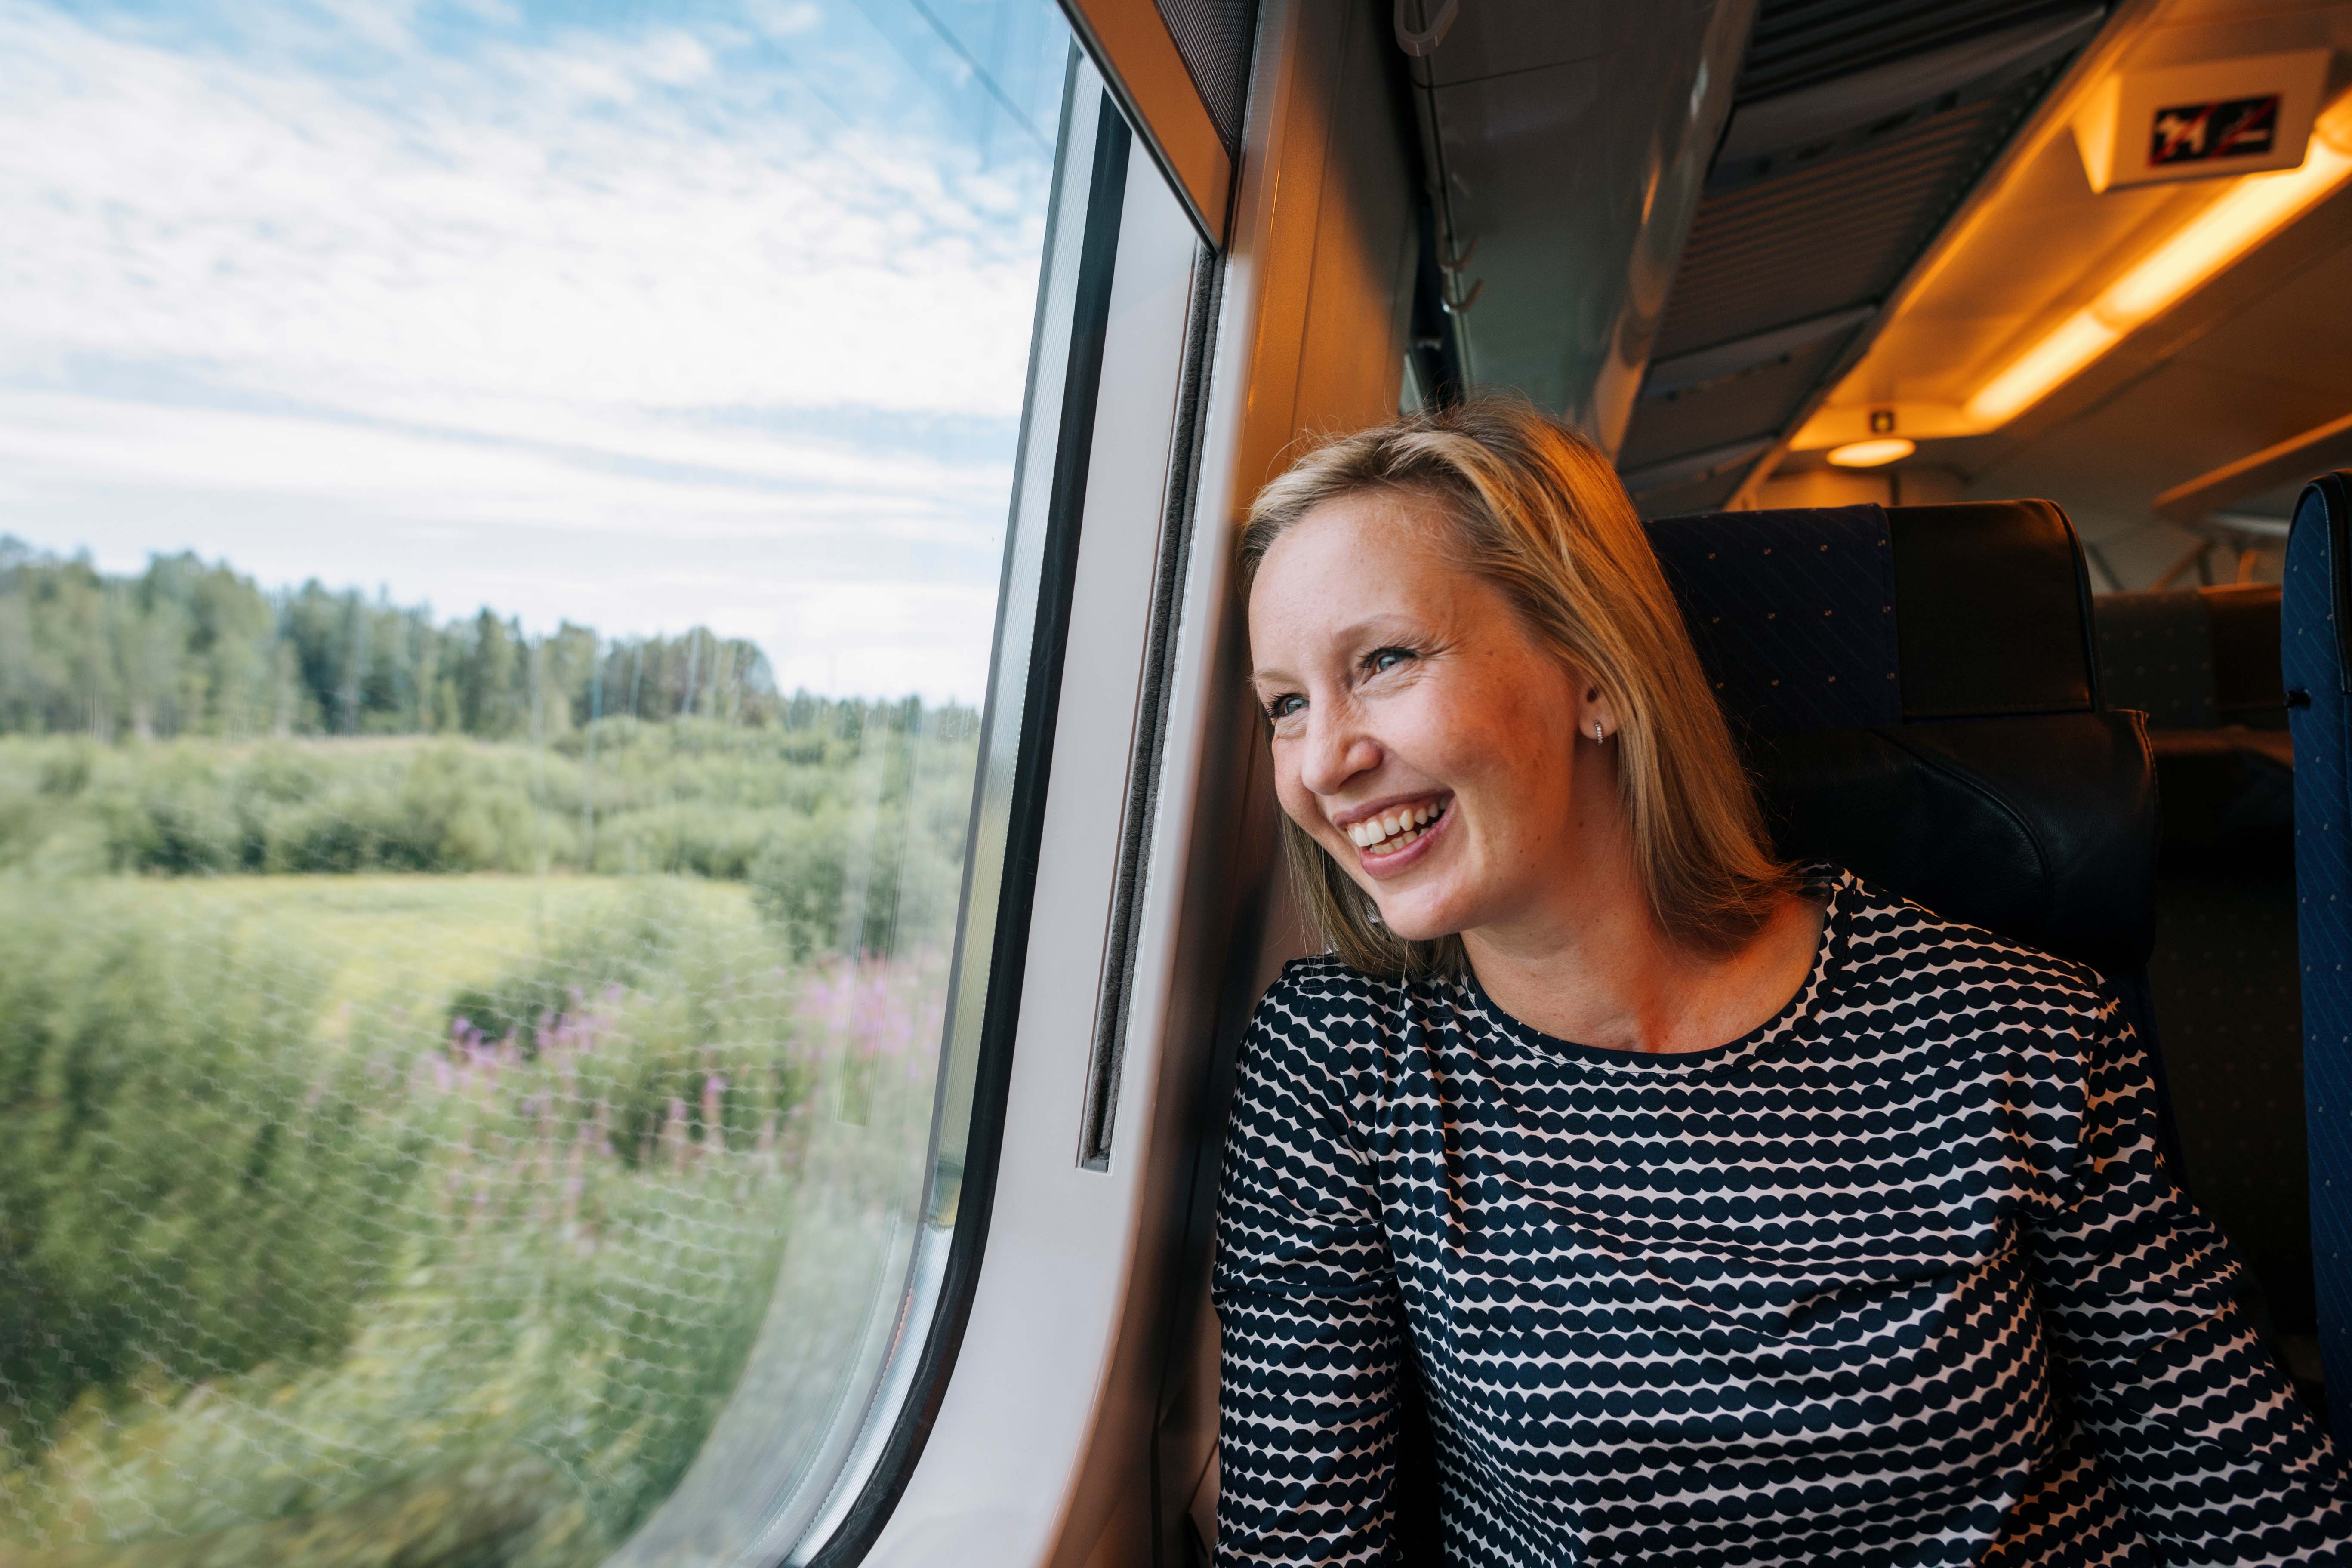 Woman on a train looking out at the scenery in Finland.